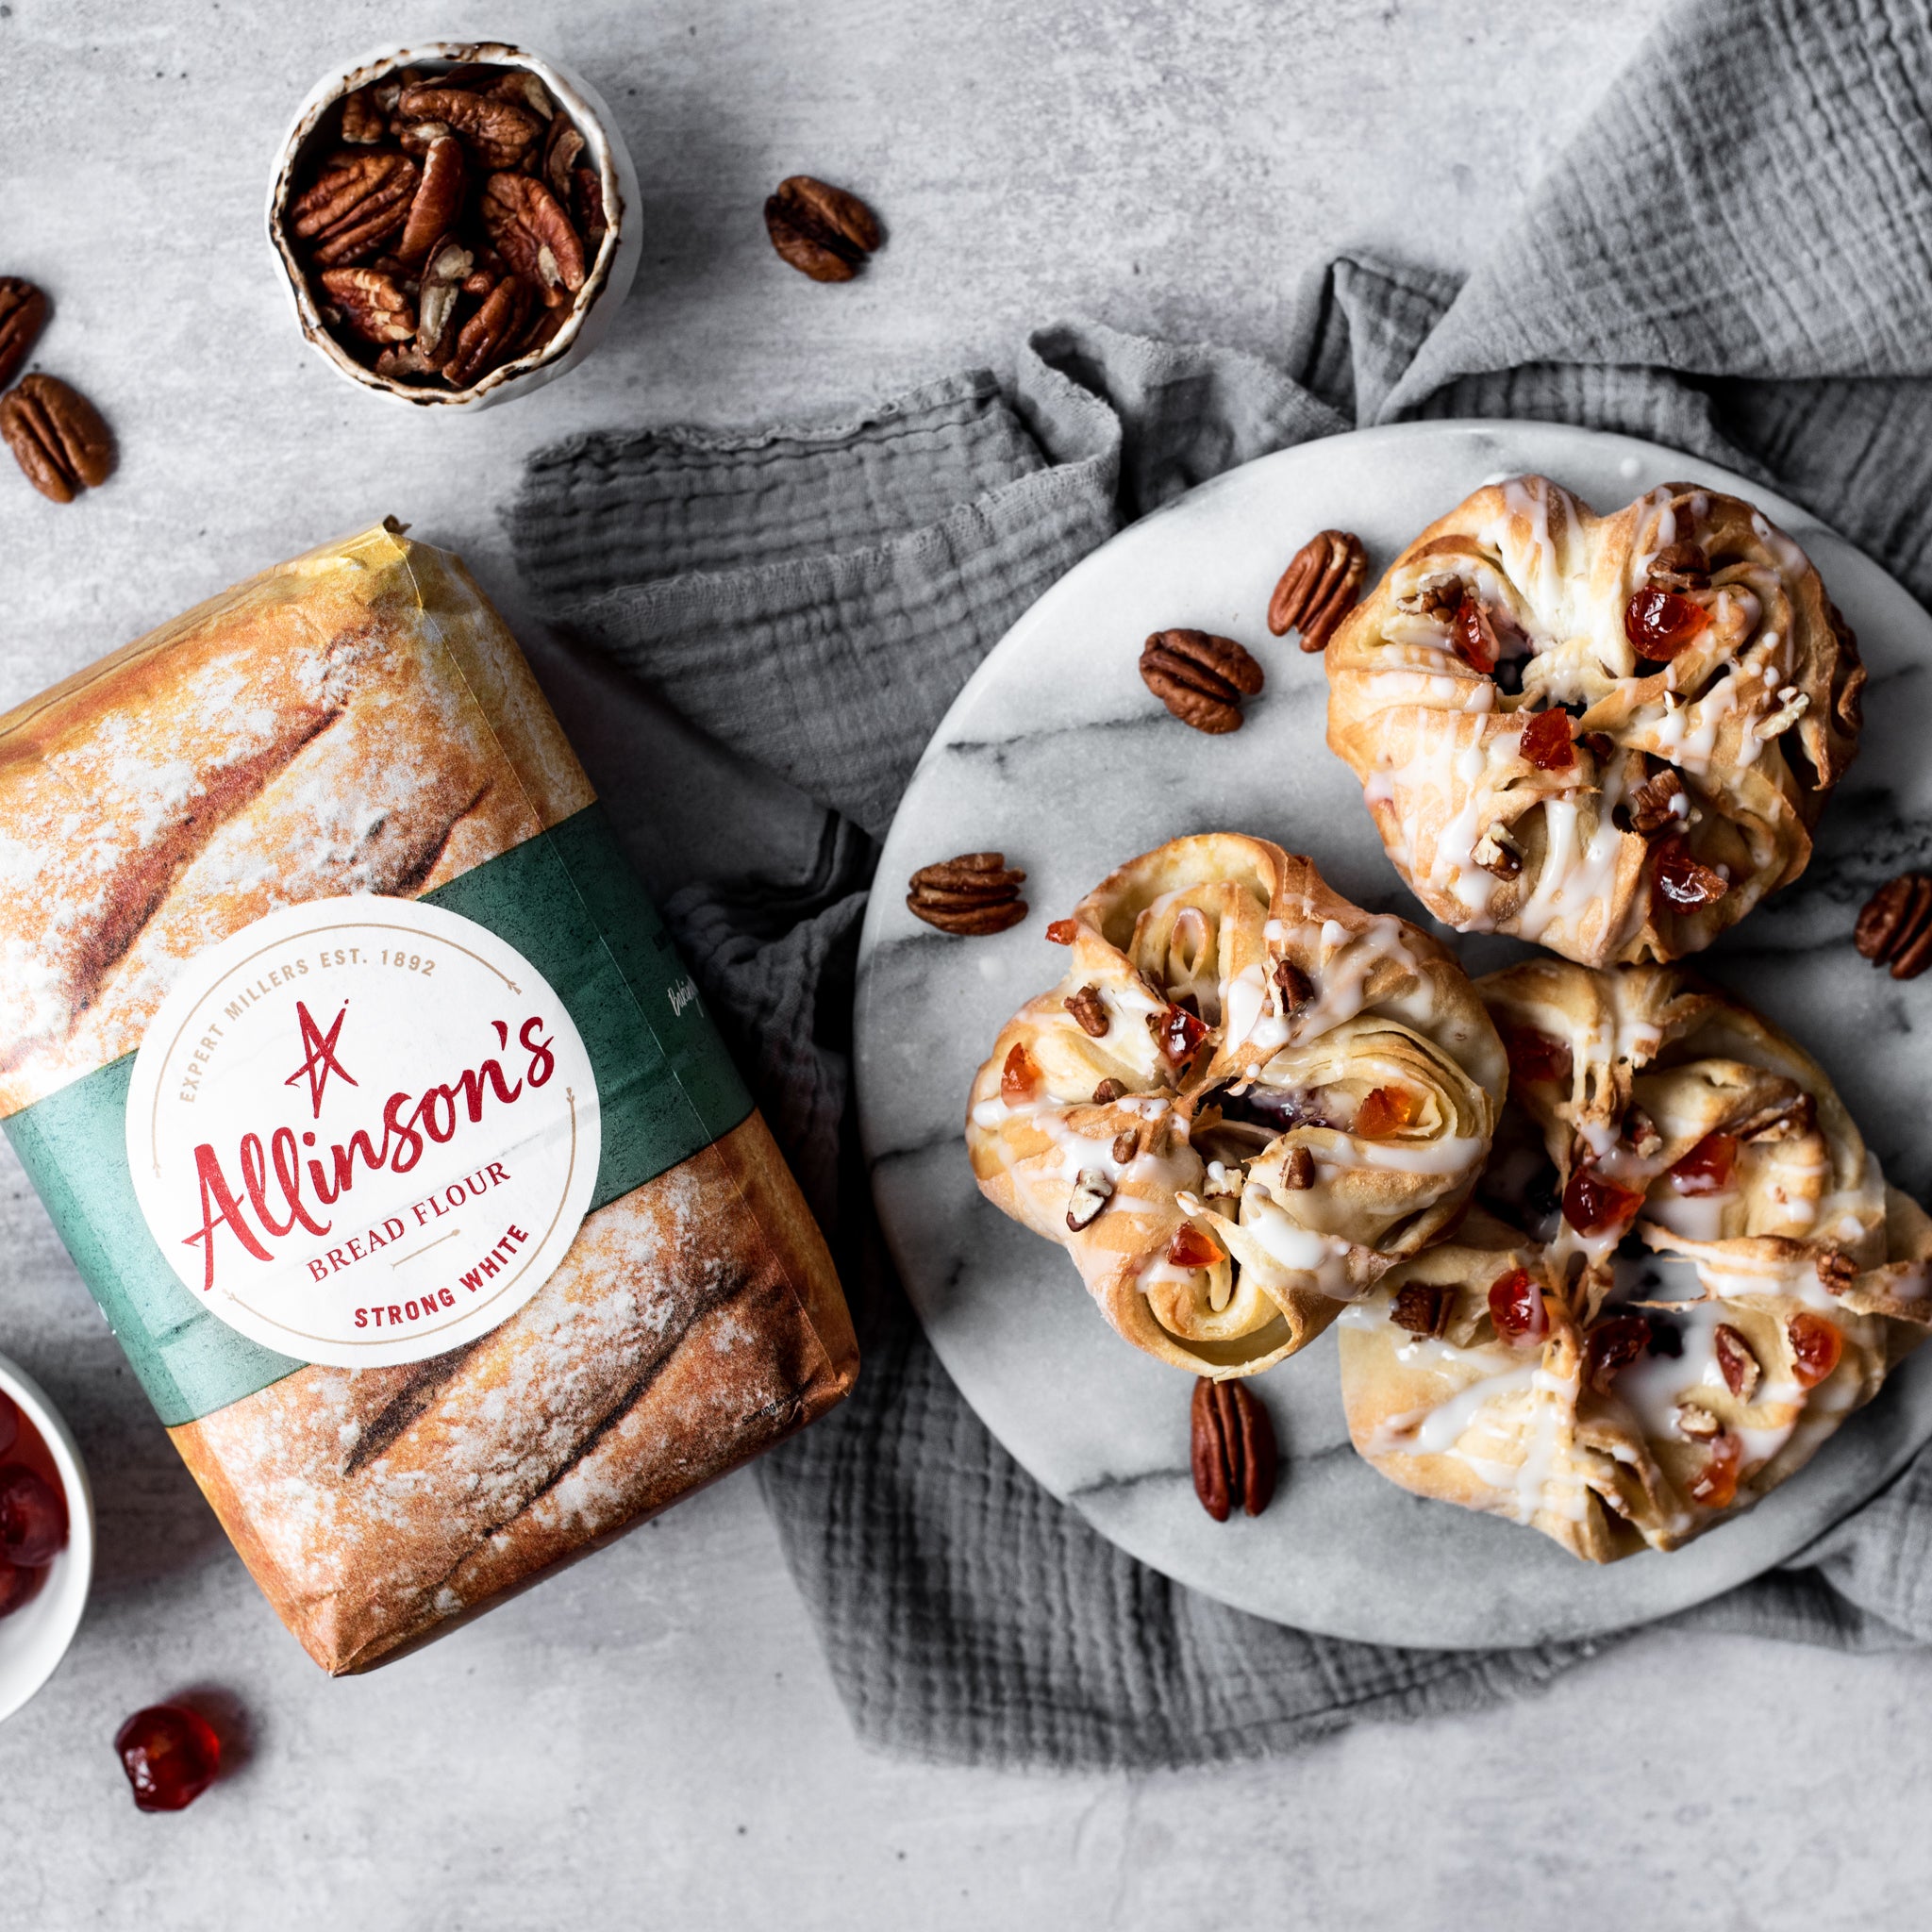 Overhead shot of 3 danish pastries on a plate with pecan nuts and flour pack